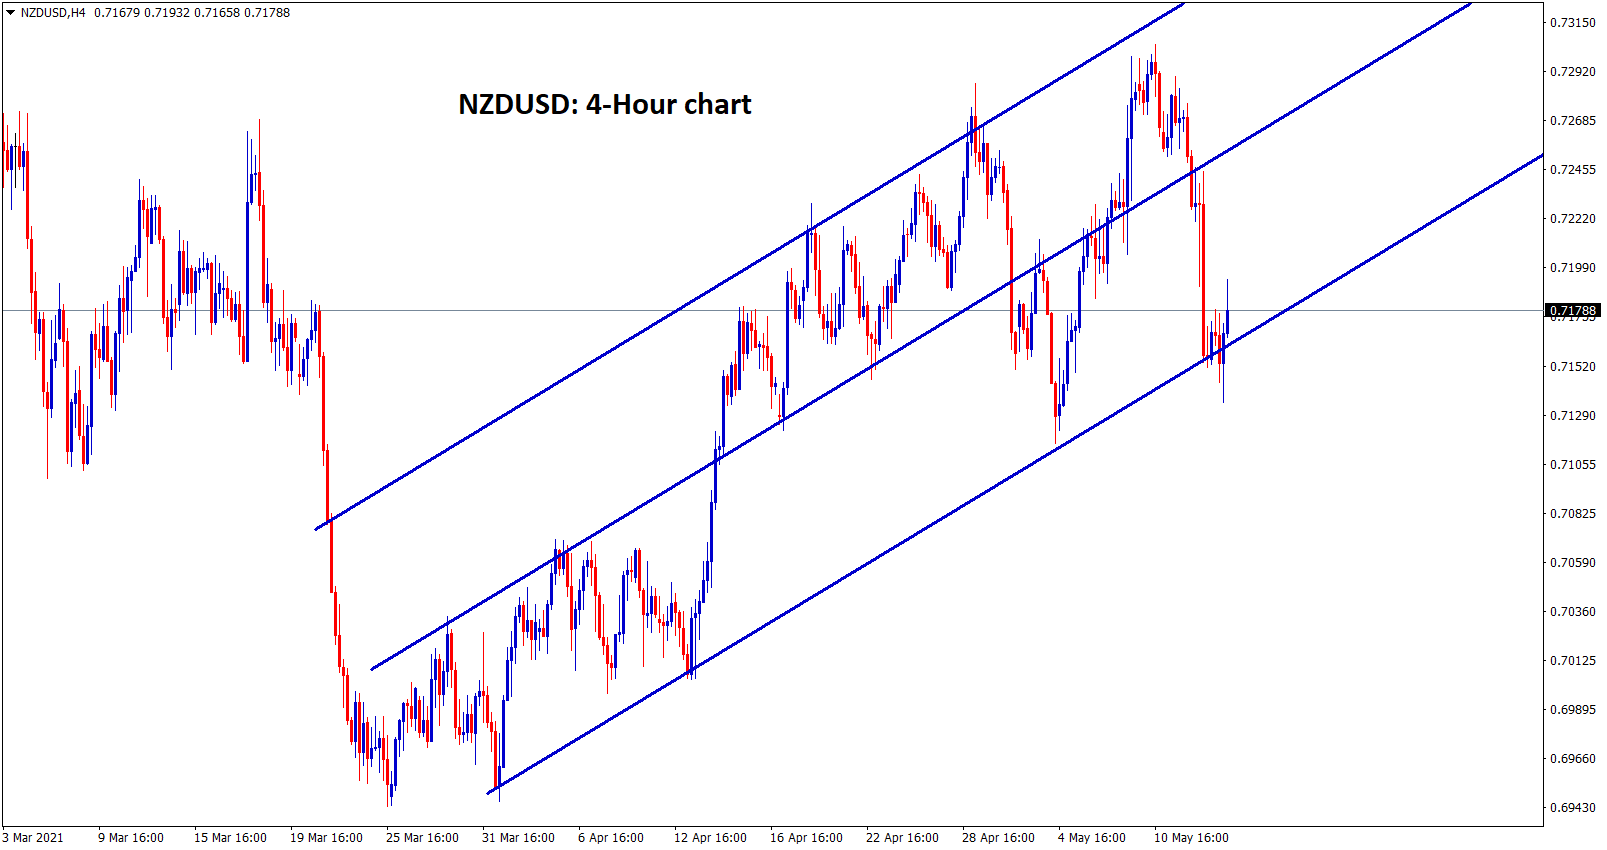 NZDUSD reach the higher low level in 4 hour chart.